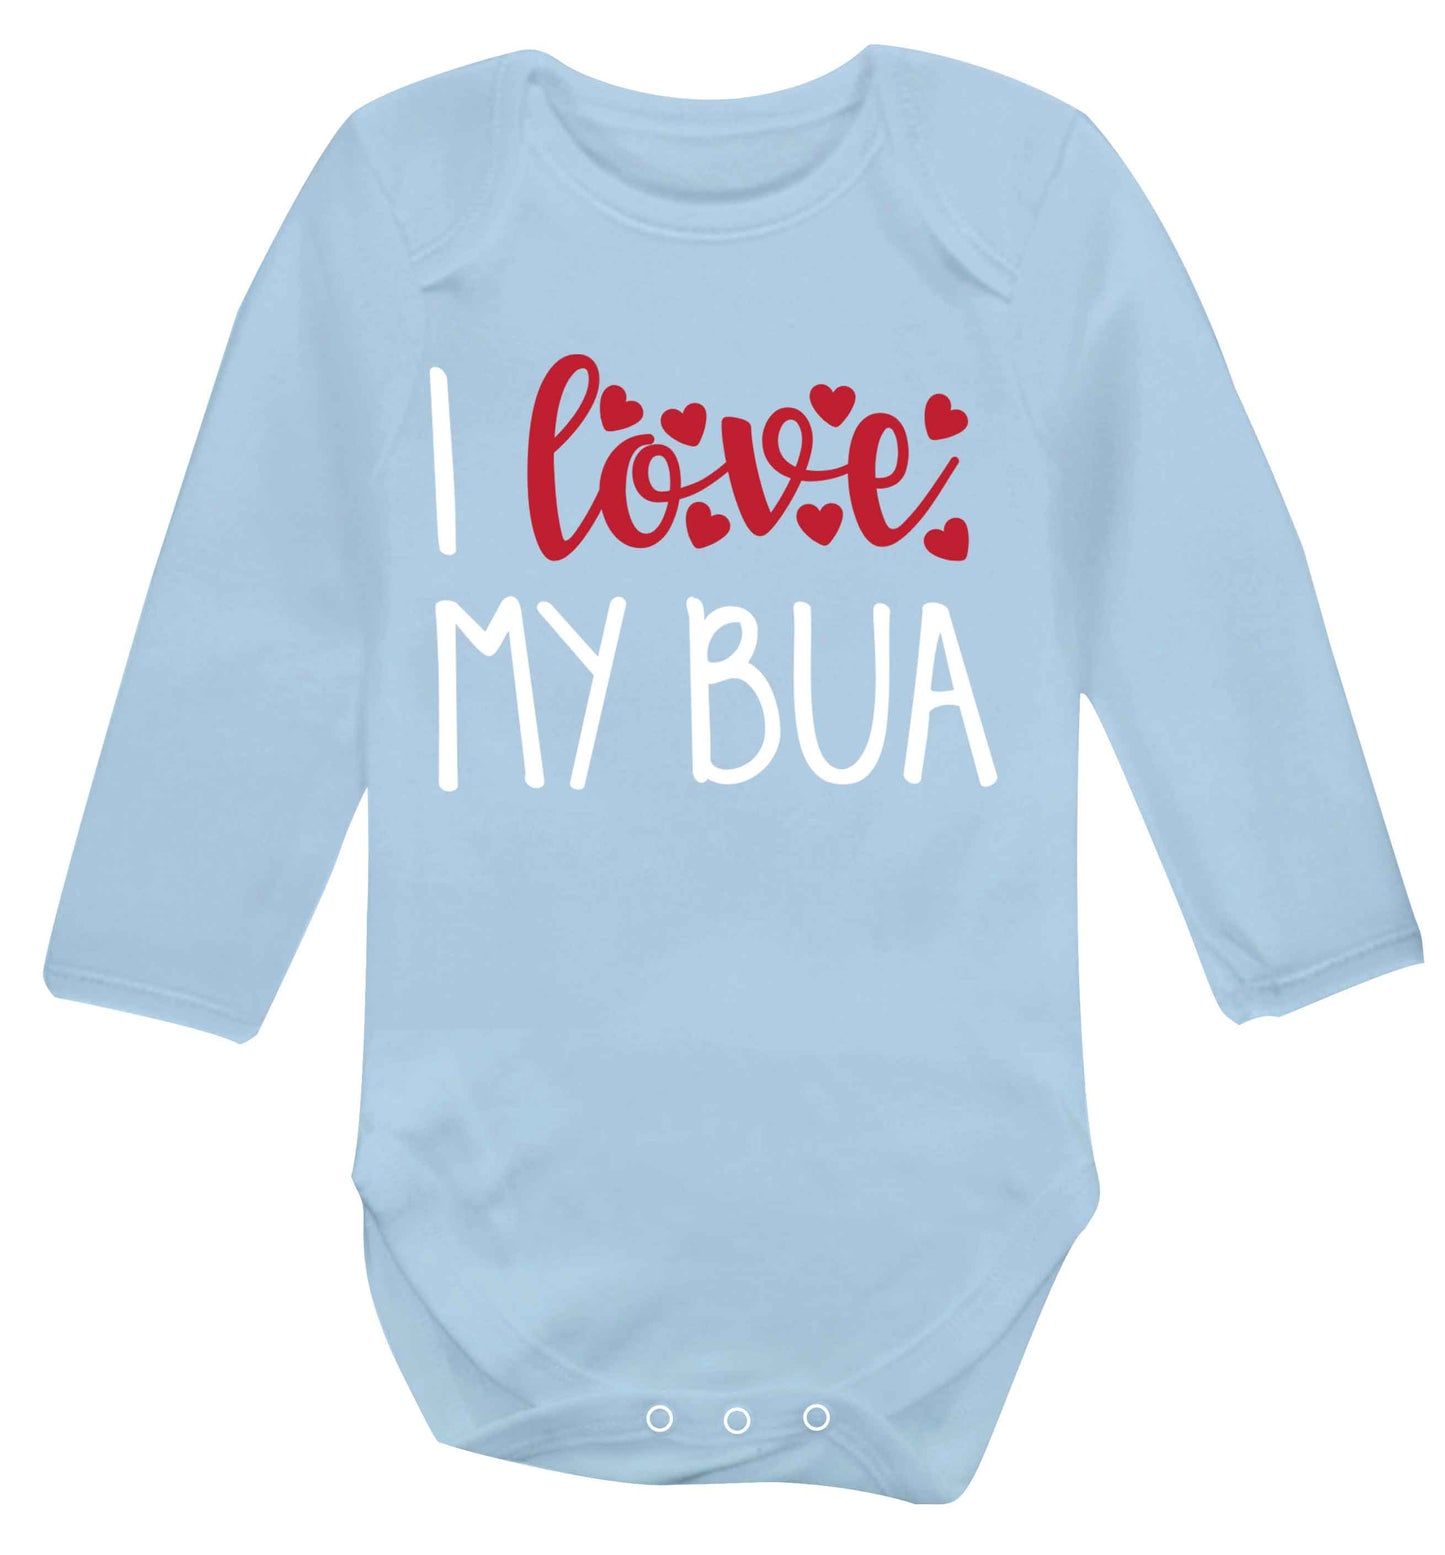 I love my bua Baby Vest long sleeved pale blue 6-12 months